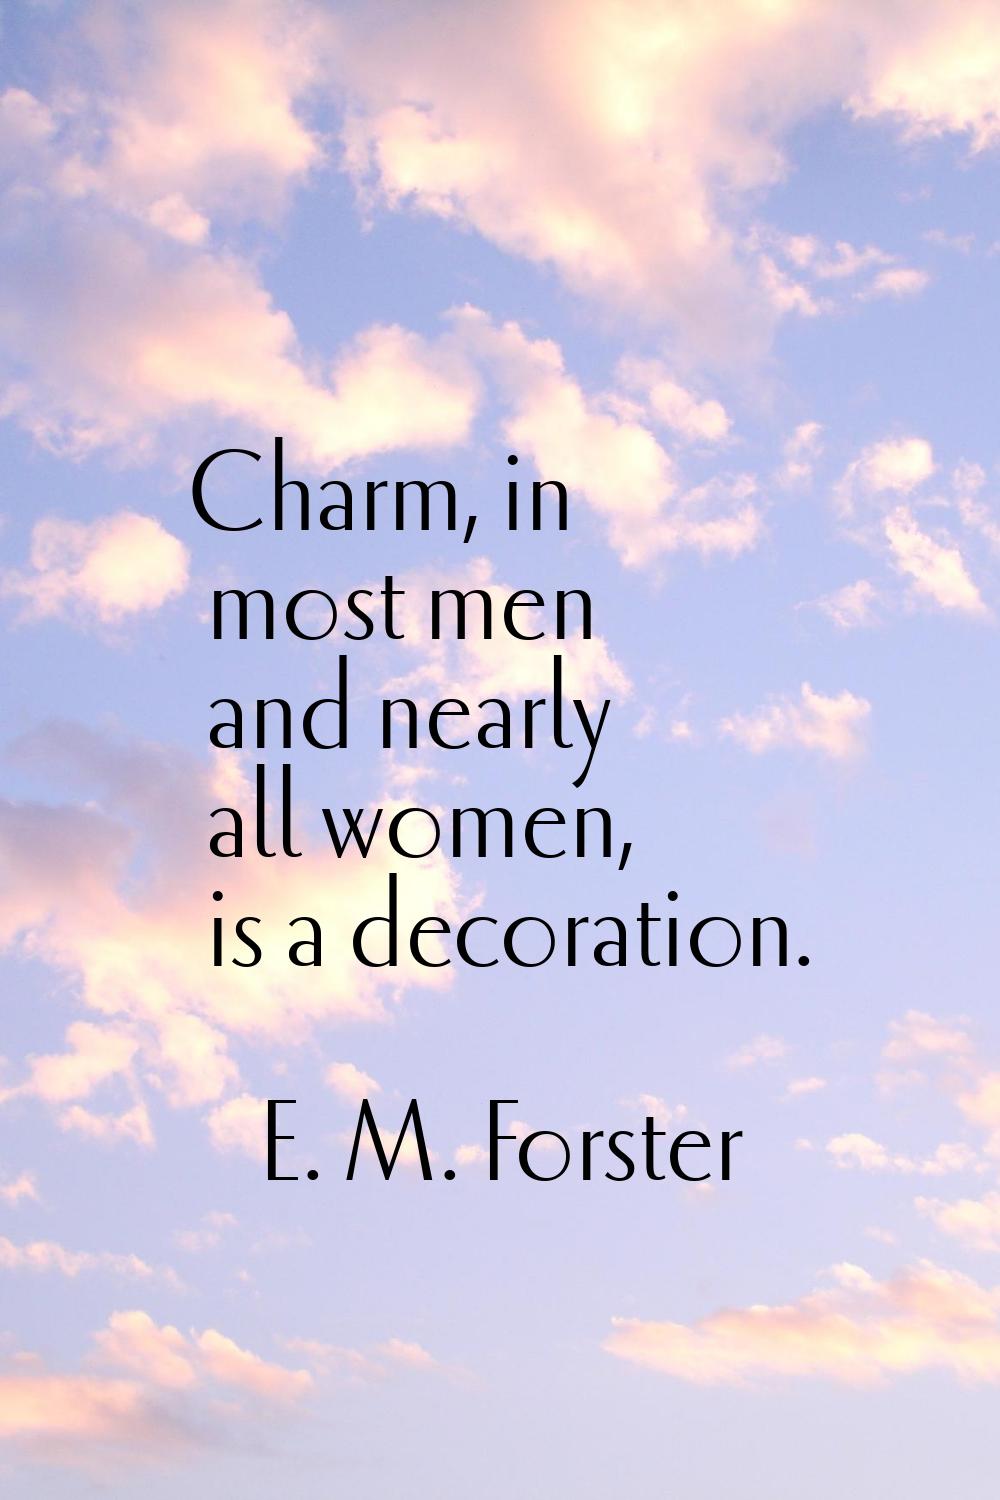 Charm, in most men and nearly all women, is a decoration.